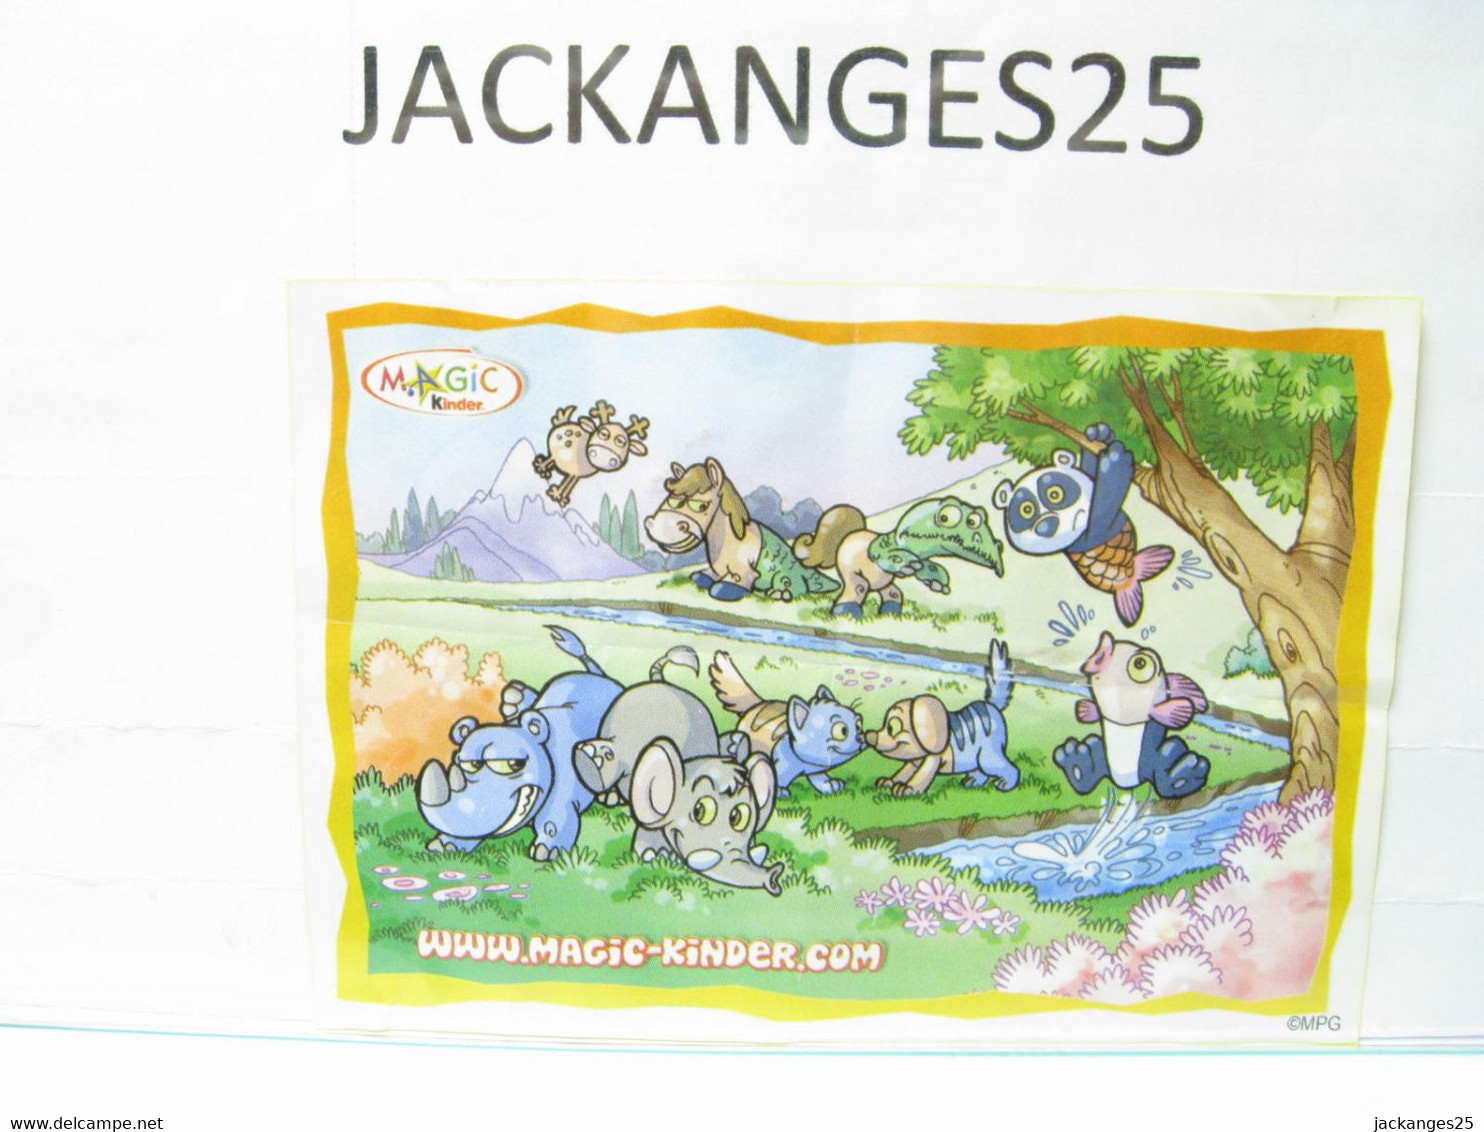 KINDER MPG NV 44 A RHINOCEROS ANIMAUX NATURE NATOONS TIERE 2008 + BPZ A - Familias